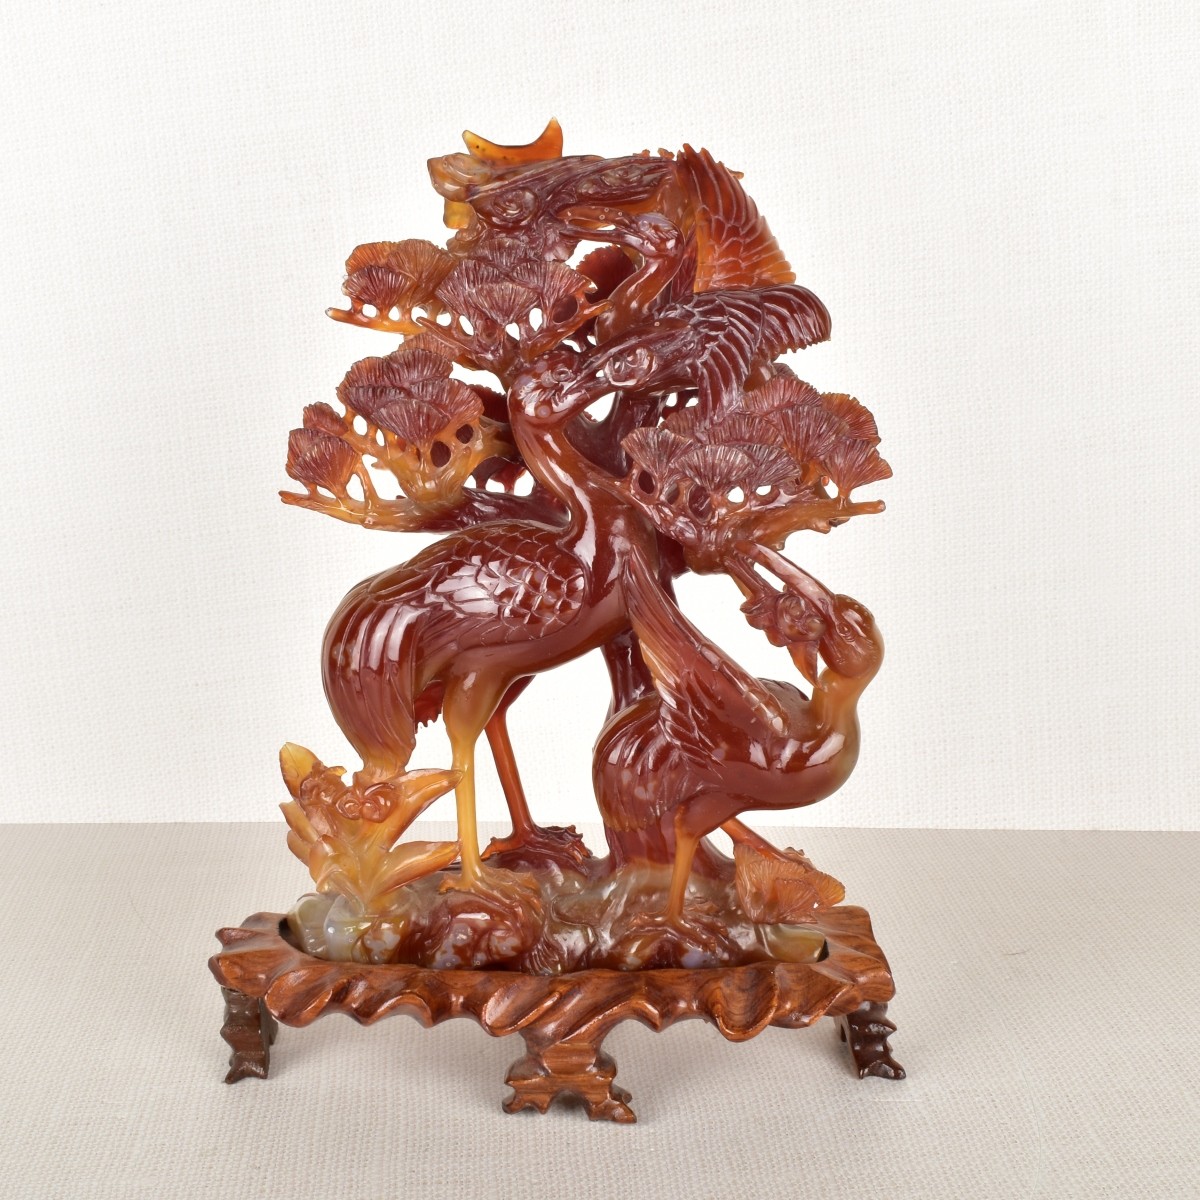 Chinese Carnelian Agate Sculpture